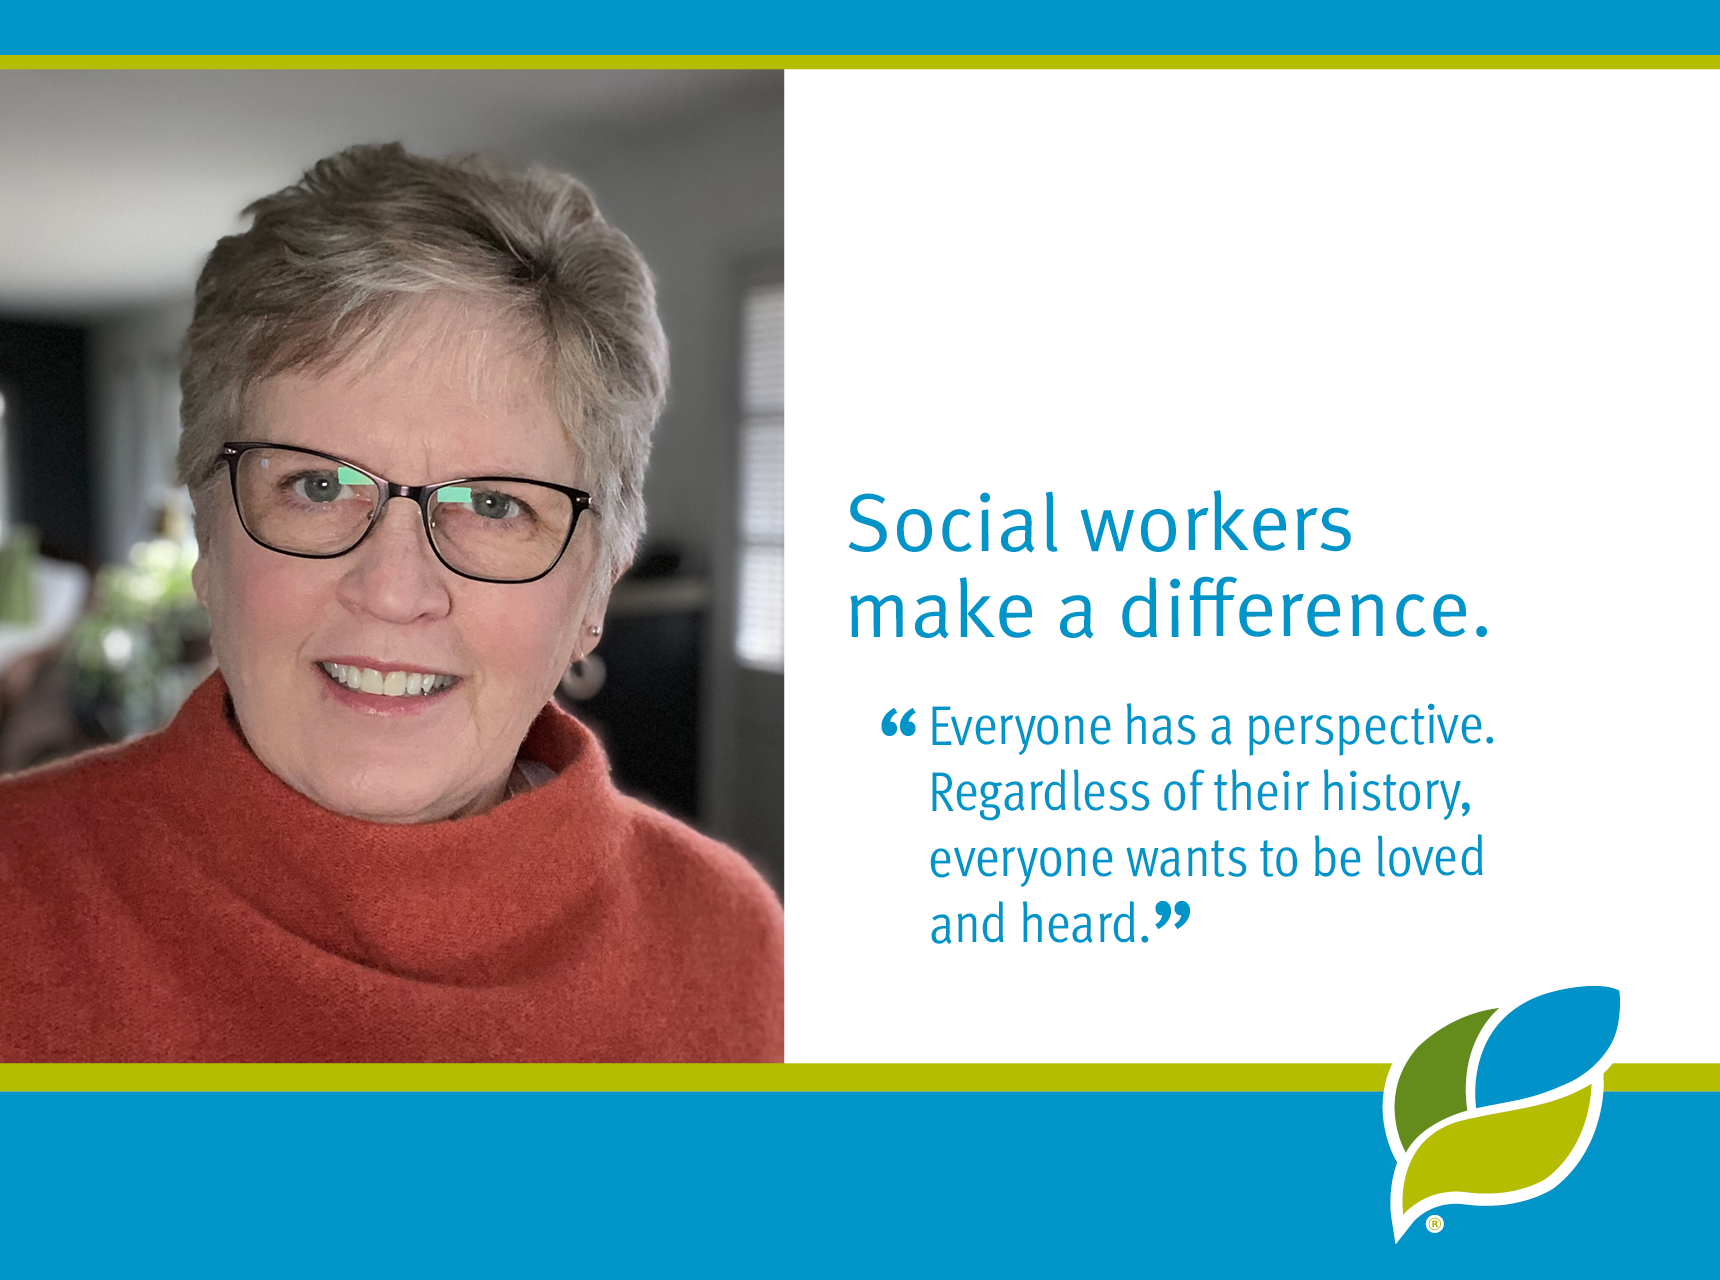 Social workers make a difference. Everyone has a perspective. Regardless of their history, everyone wants to one loved and heard.